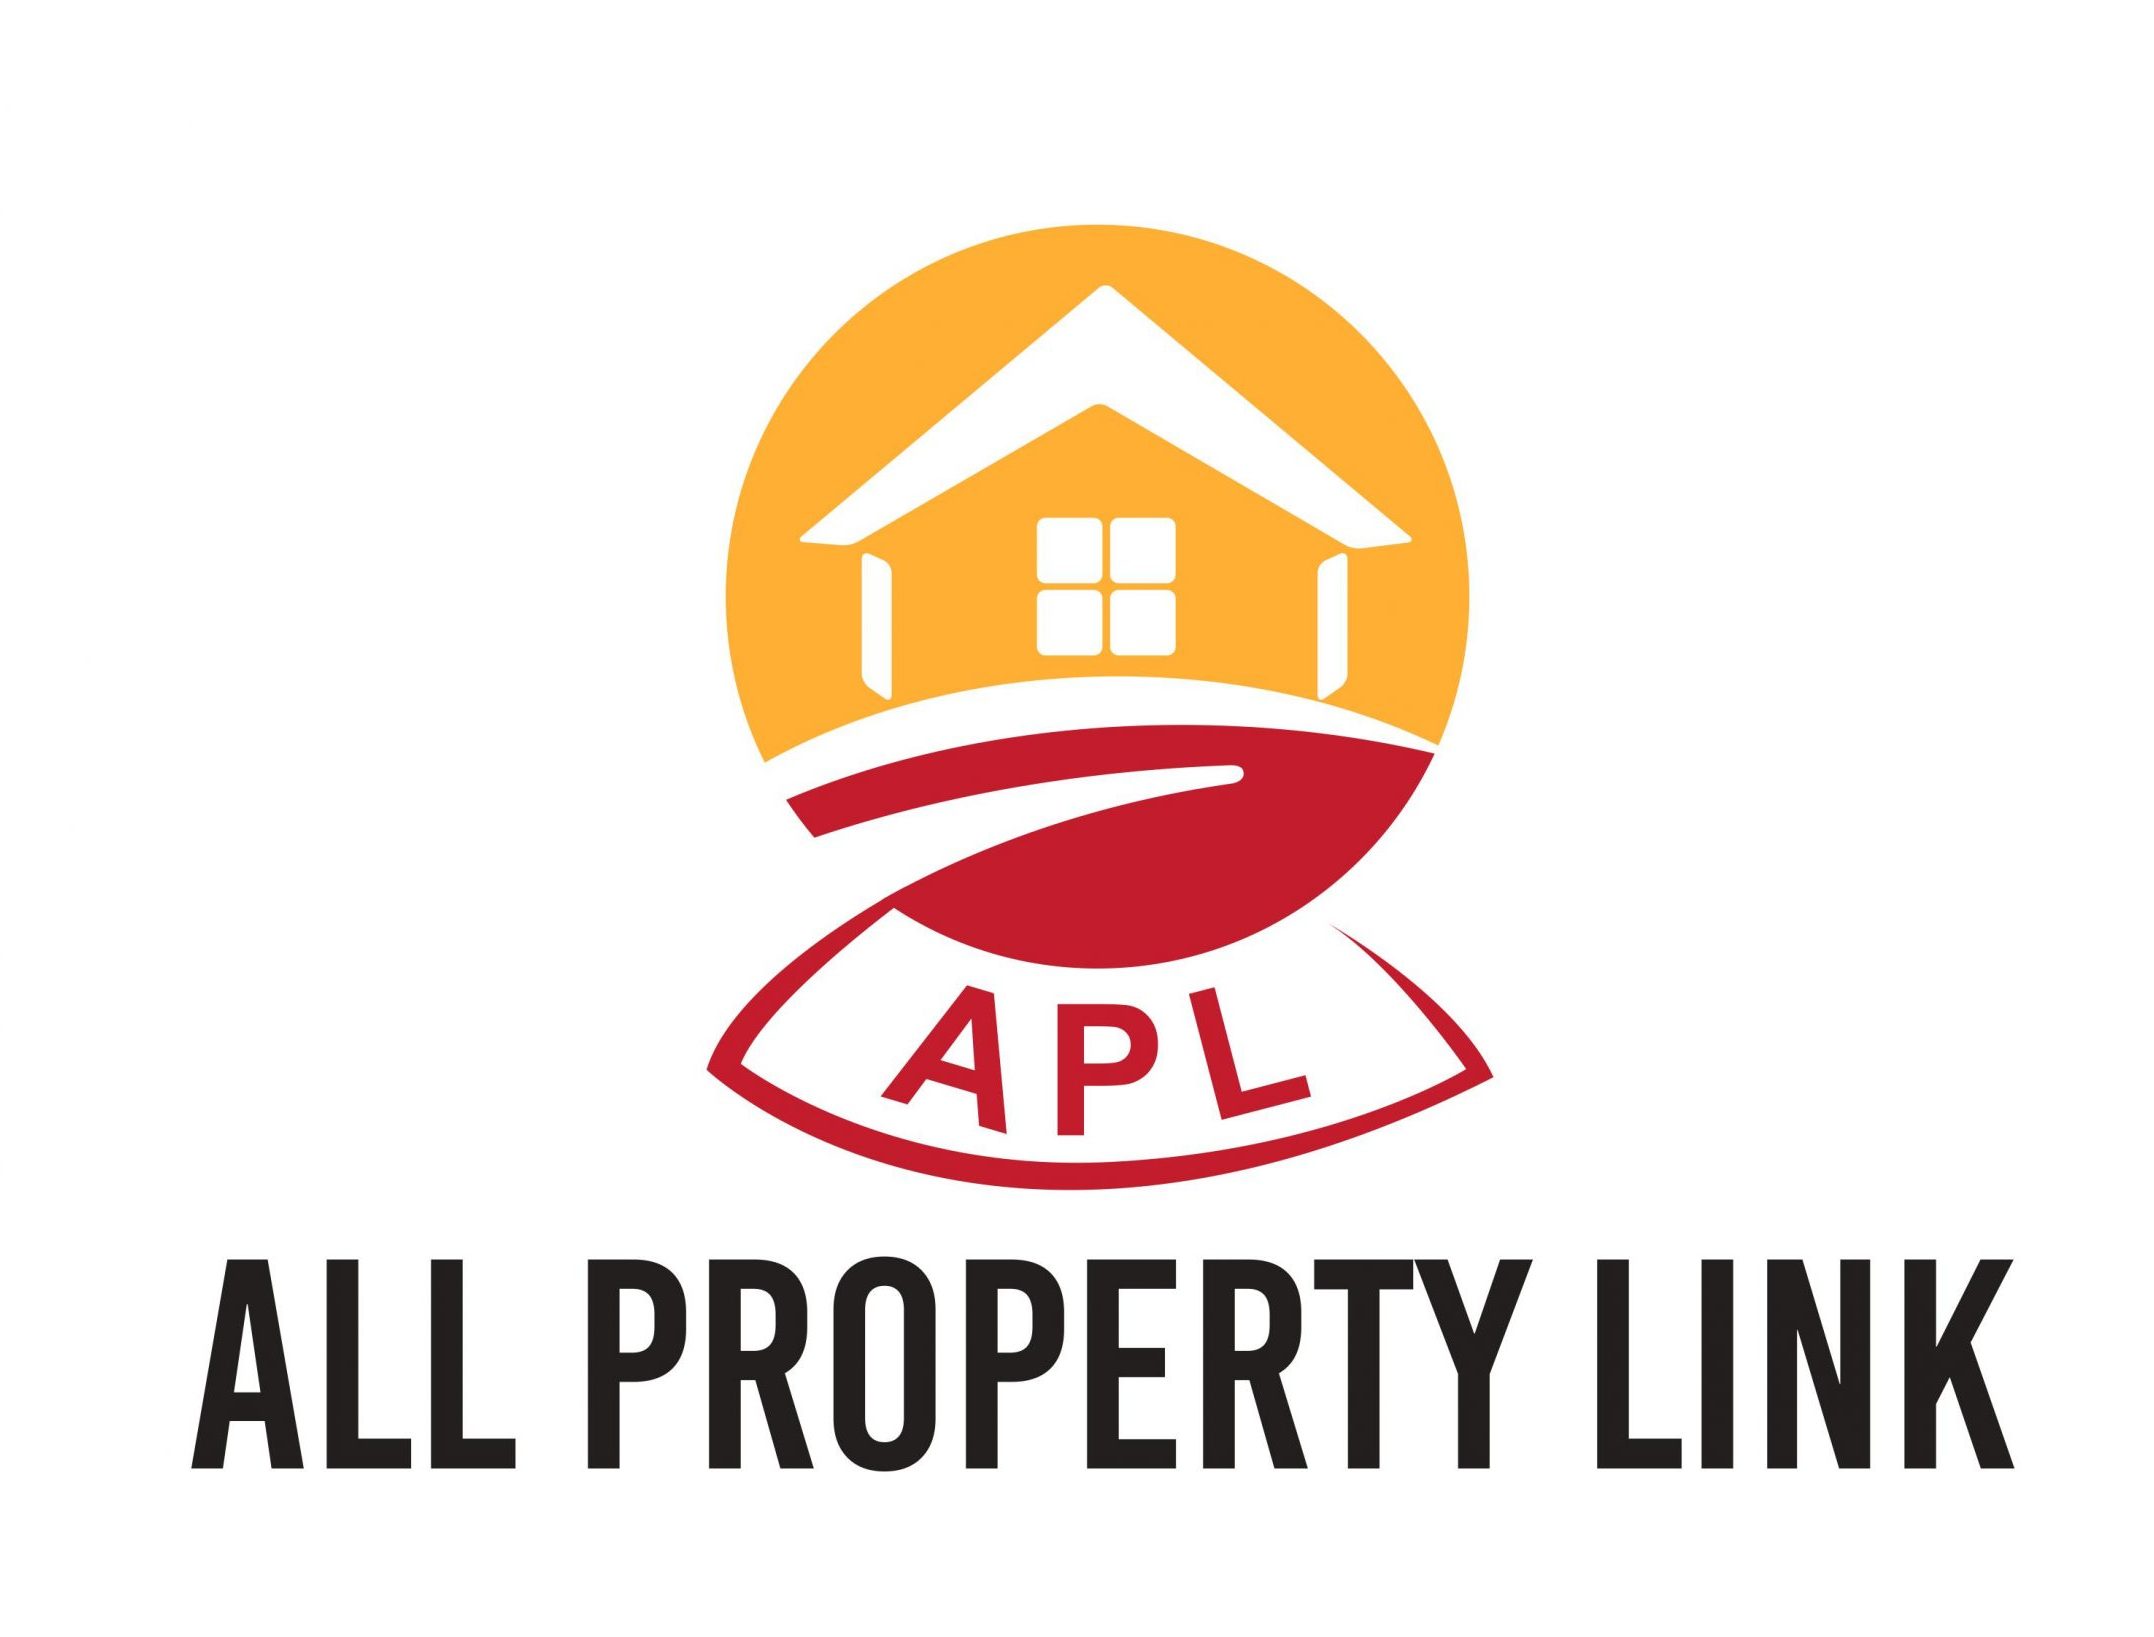 All Property link.